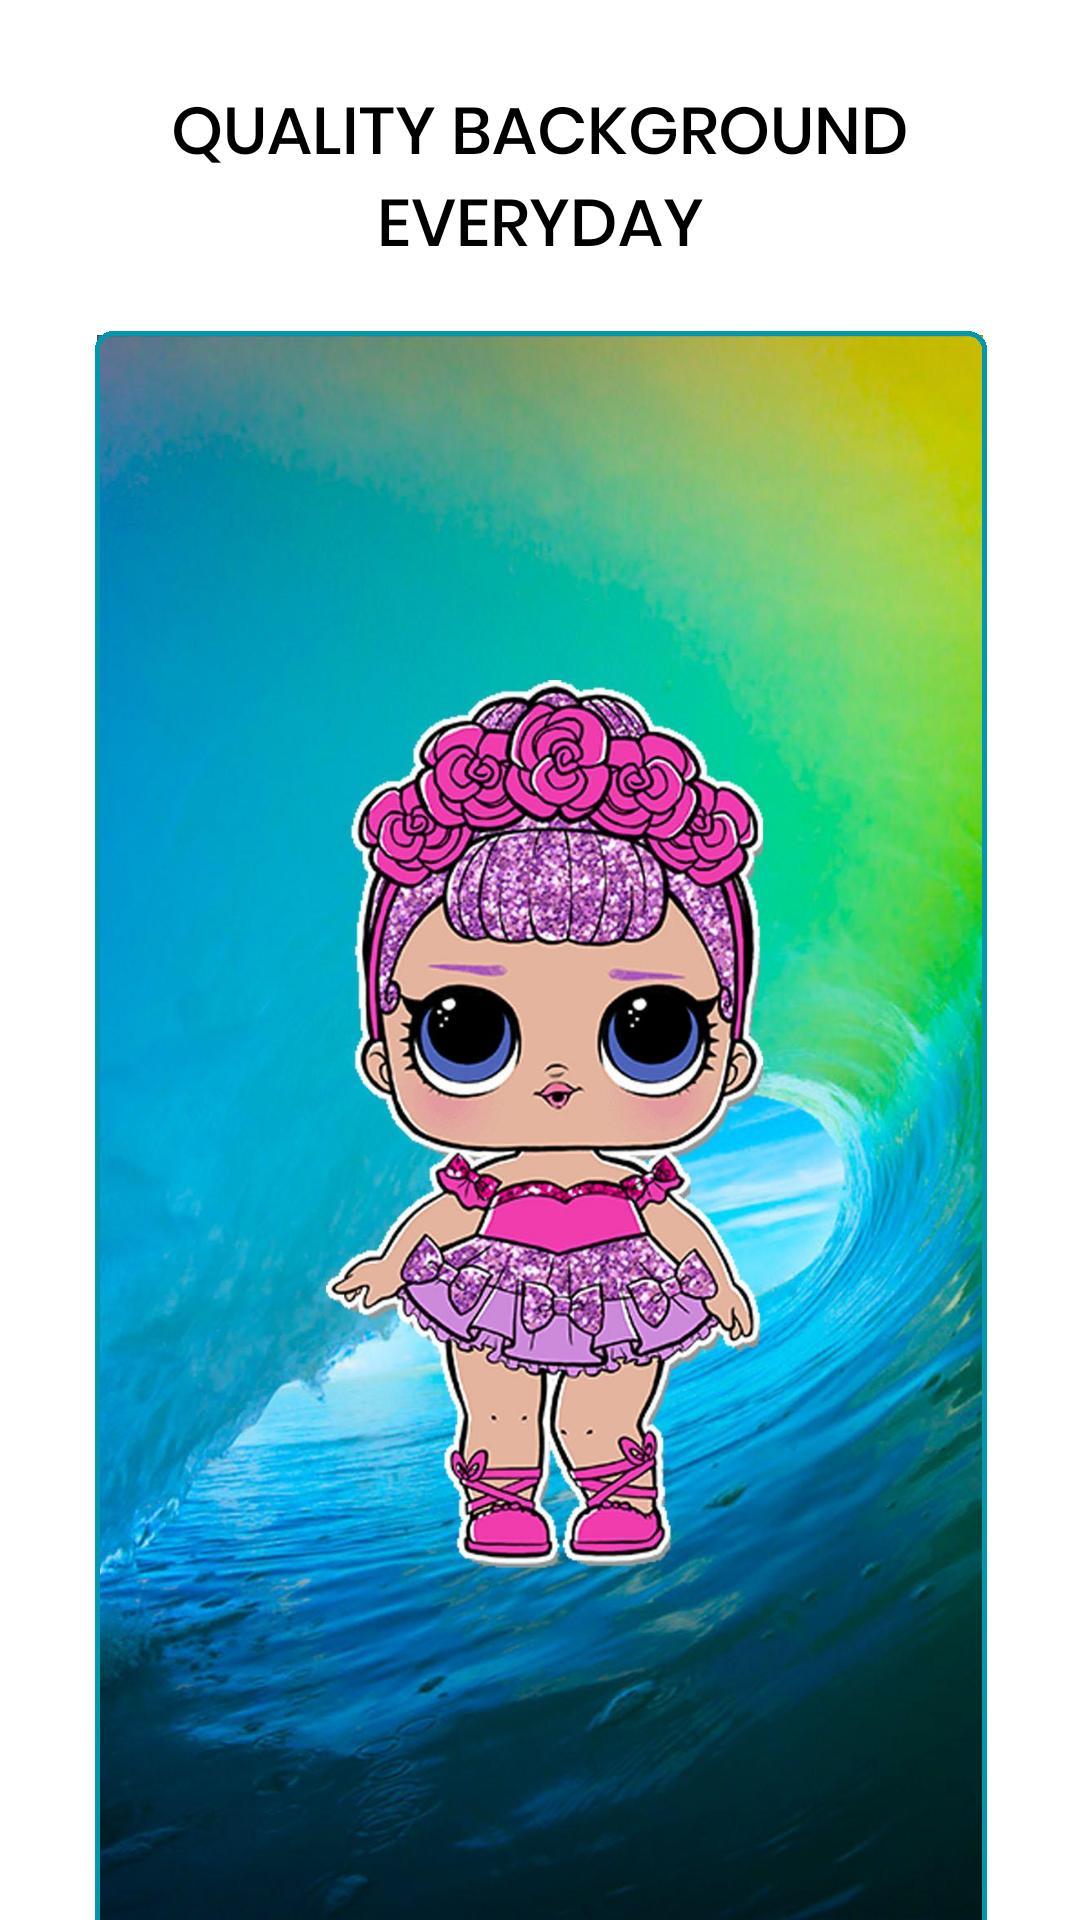 1080 x 1920 · jpeg - Cute Doll Surprise Wallpapers - LOL Surprise Dolls for Android - APK ...